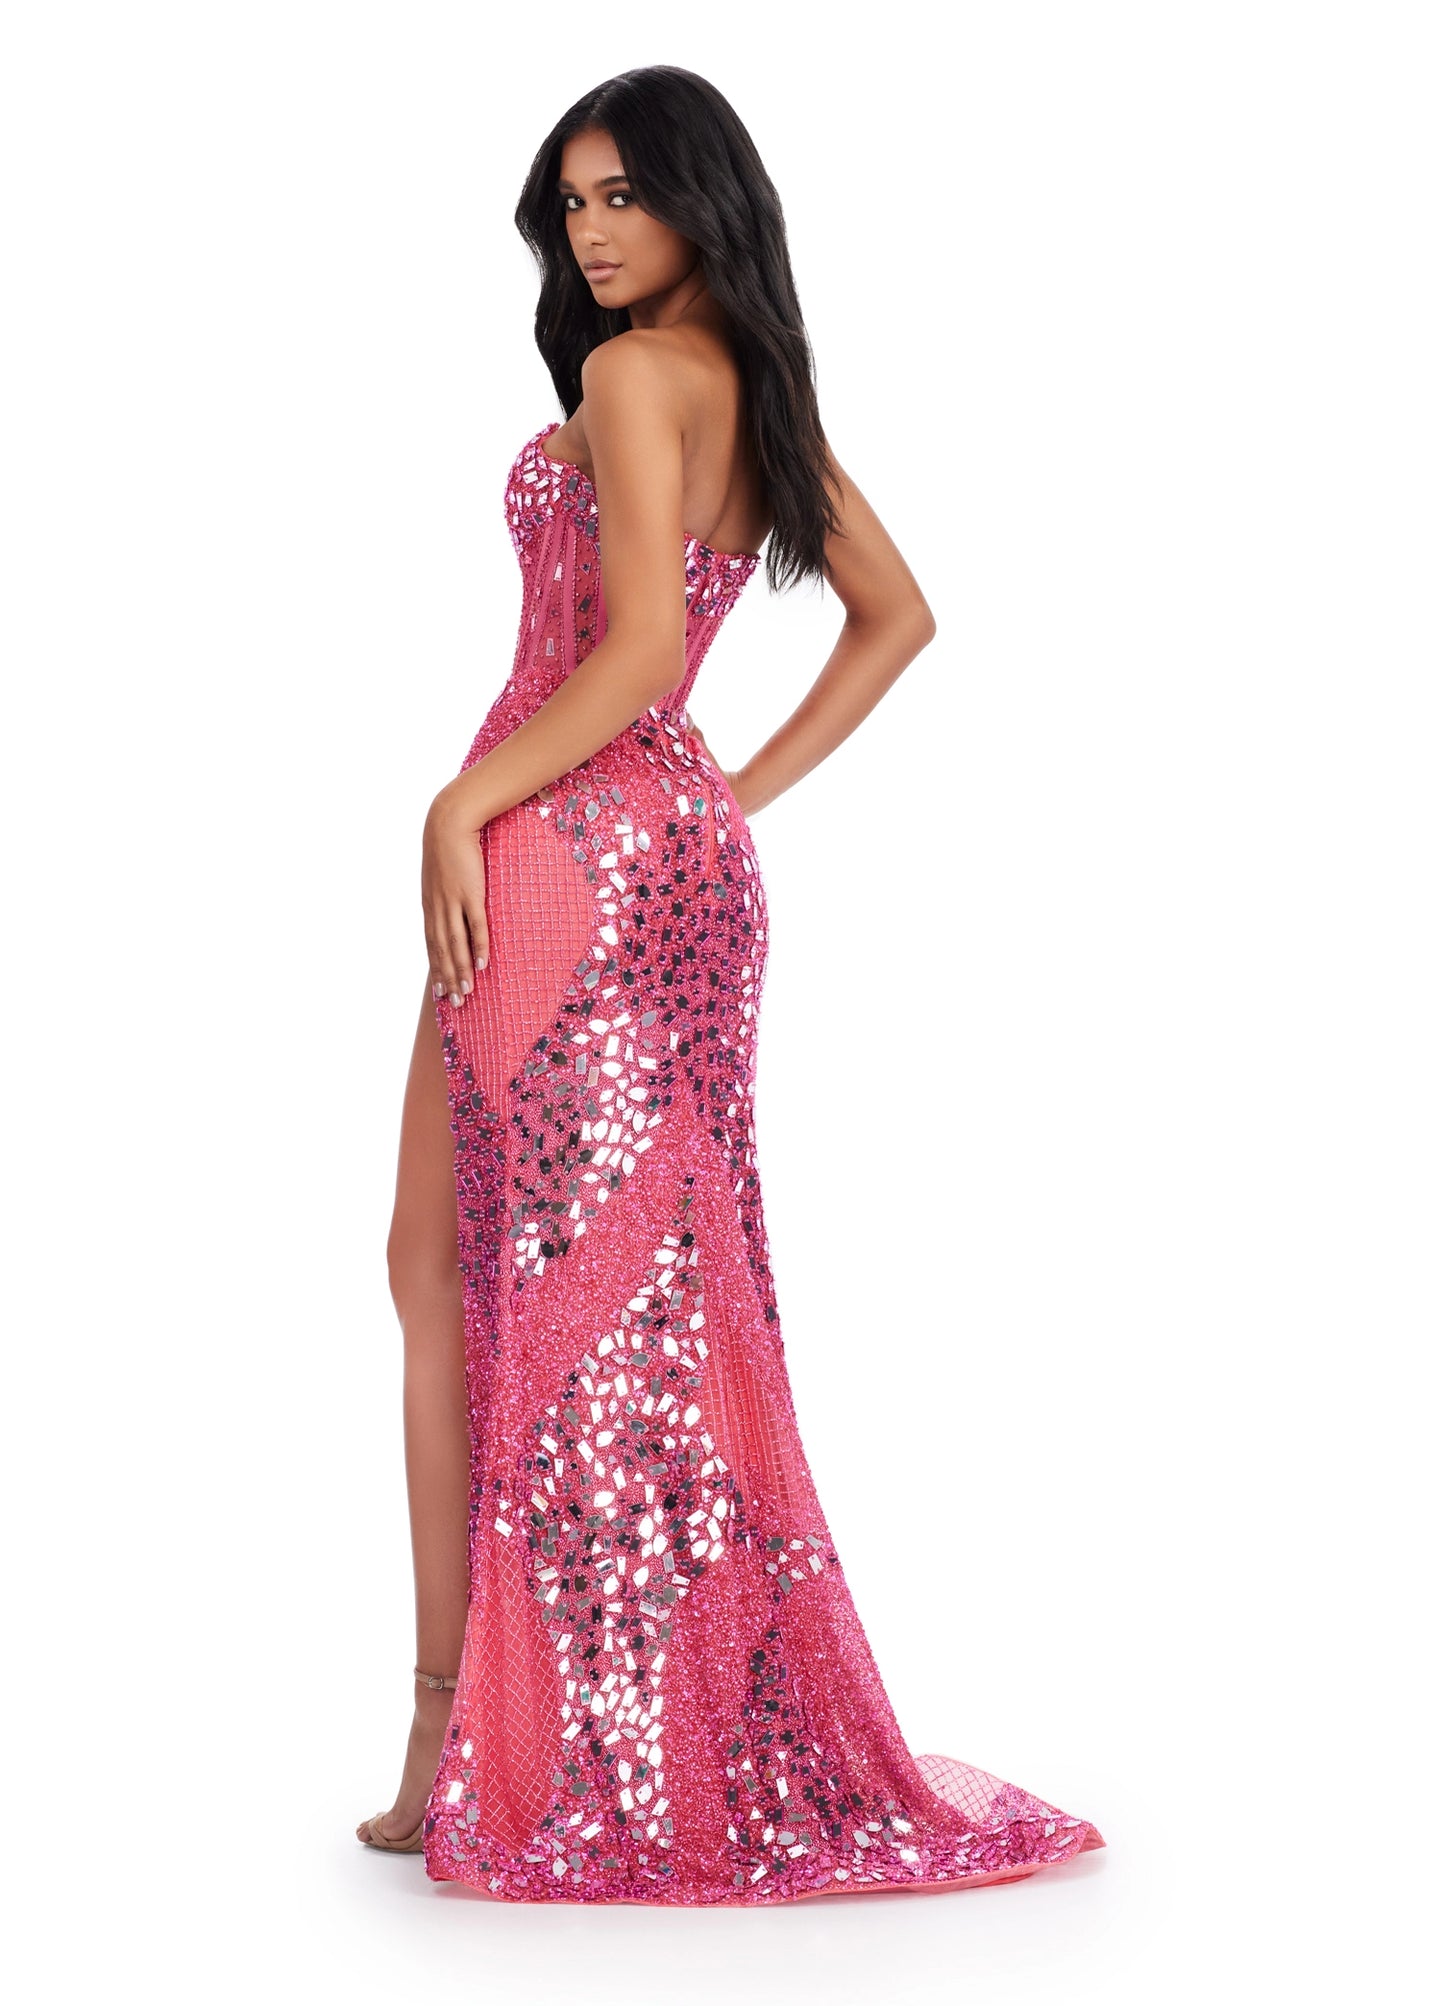 The Ashley Lauren 11599 prom dress is an eye-catching statement piece. Crafted from luxurious glistening cut glass fabric, this gown features an alluring corset-style bodice and a show-stopping thigh-high slit. The gleaming beaded embellishments add a touch of sparkle that is sure to make you shine